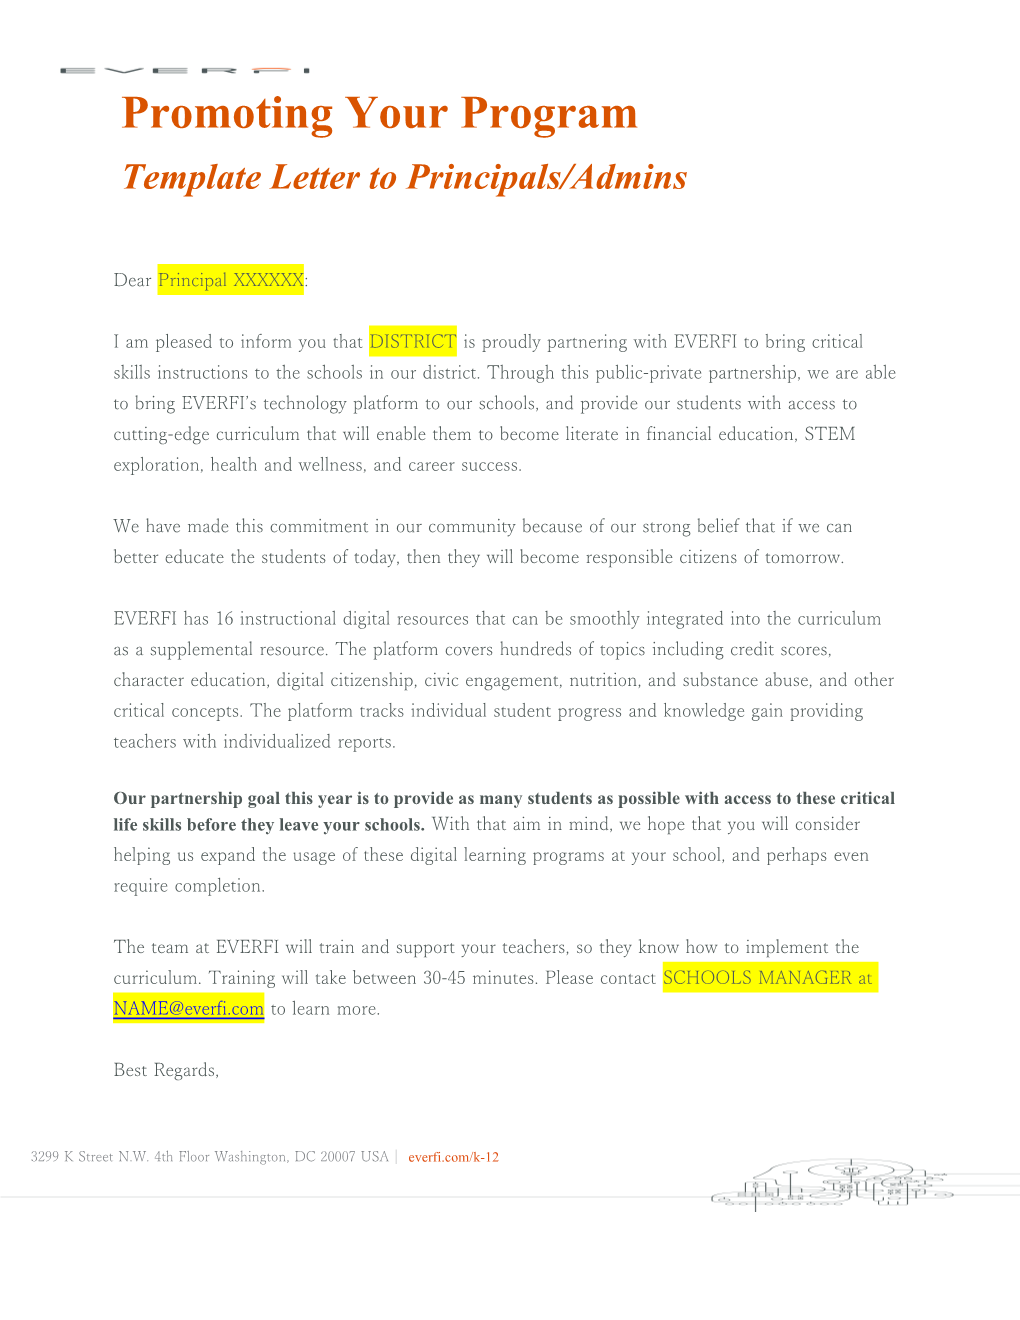 Template Letter to Principals/Admins